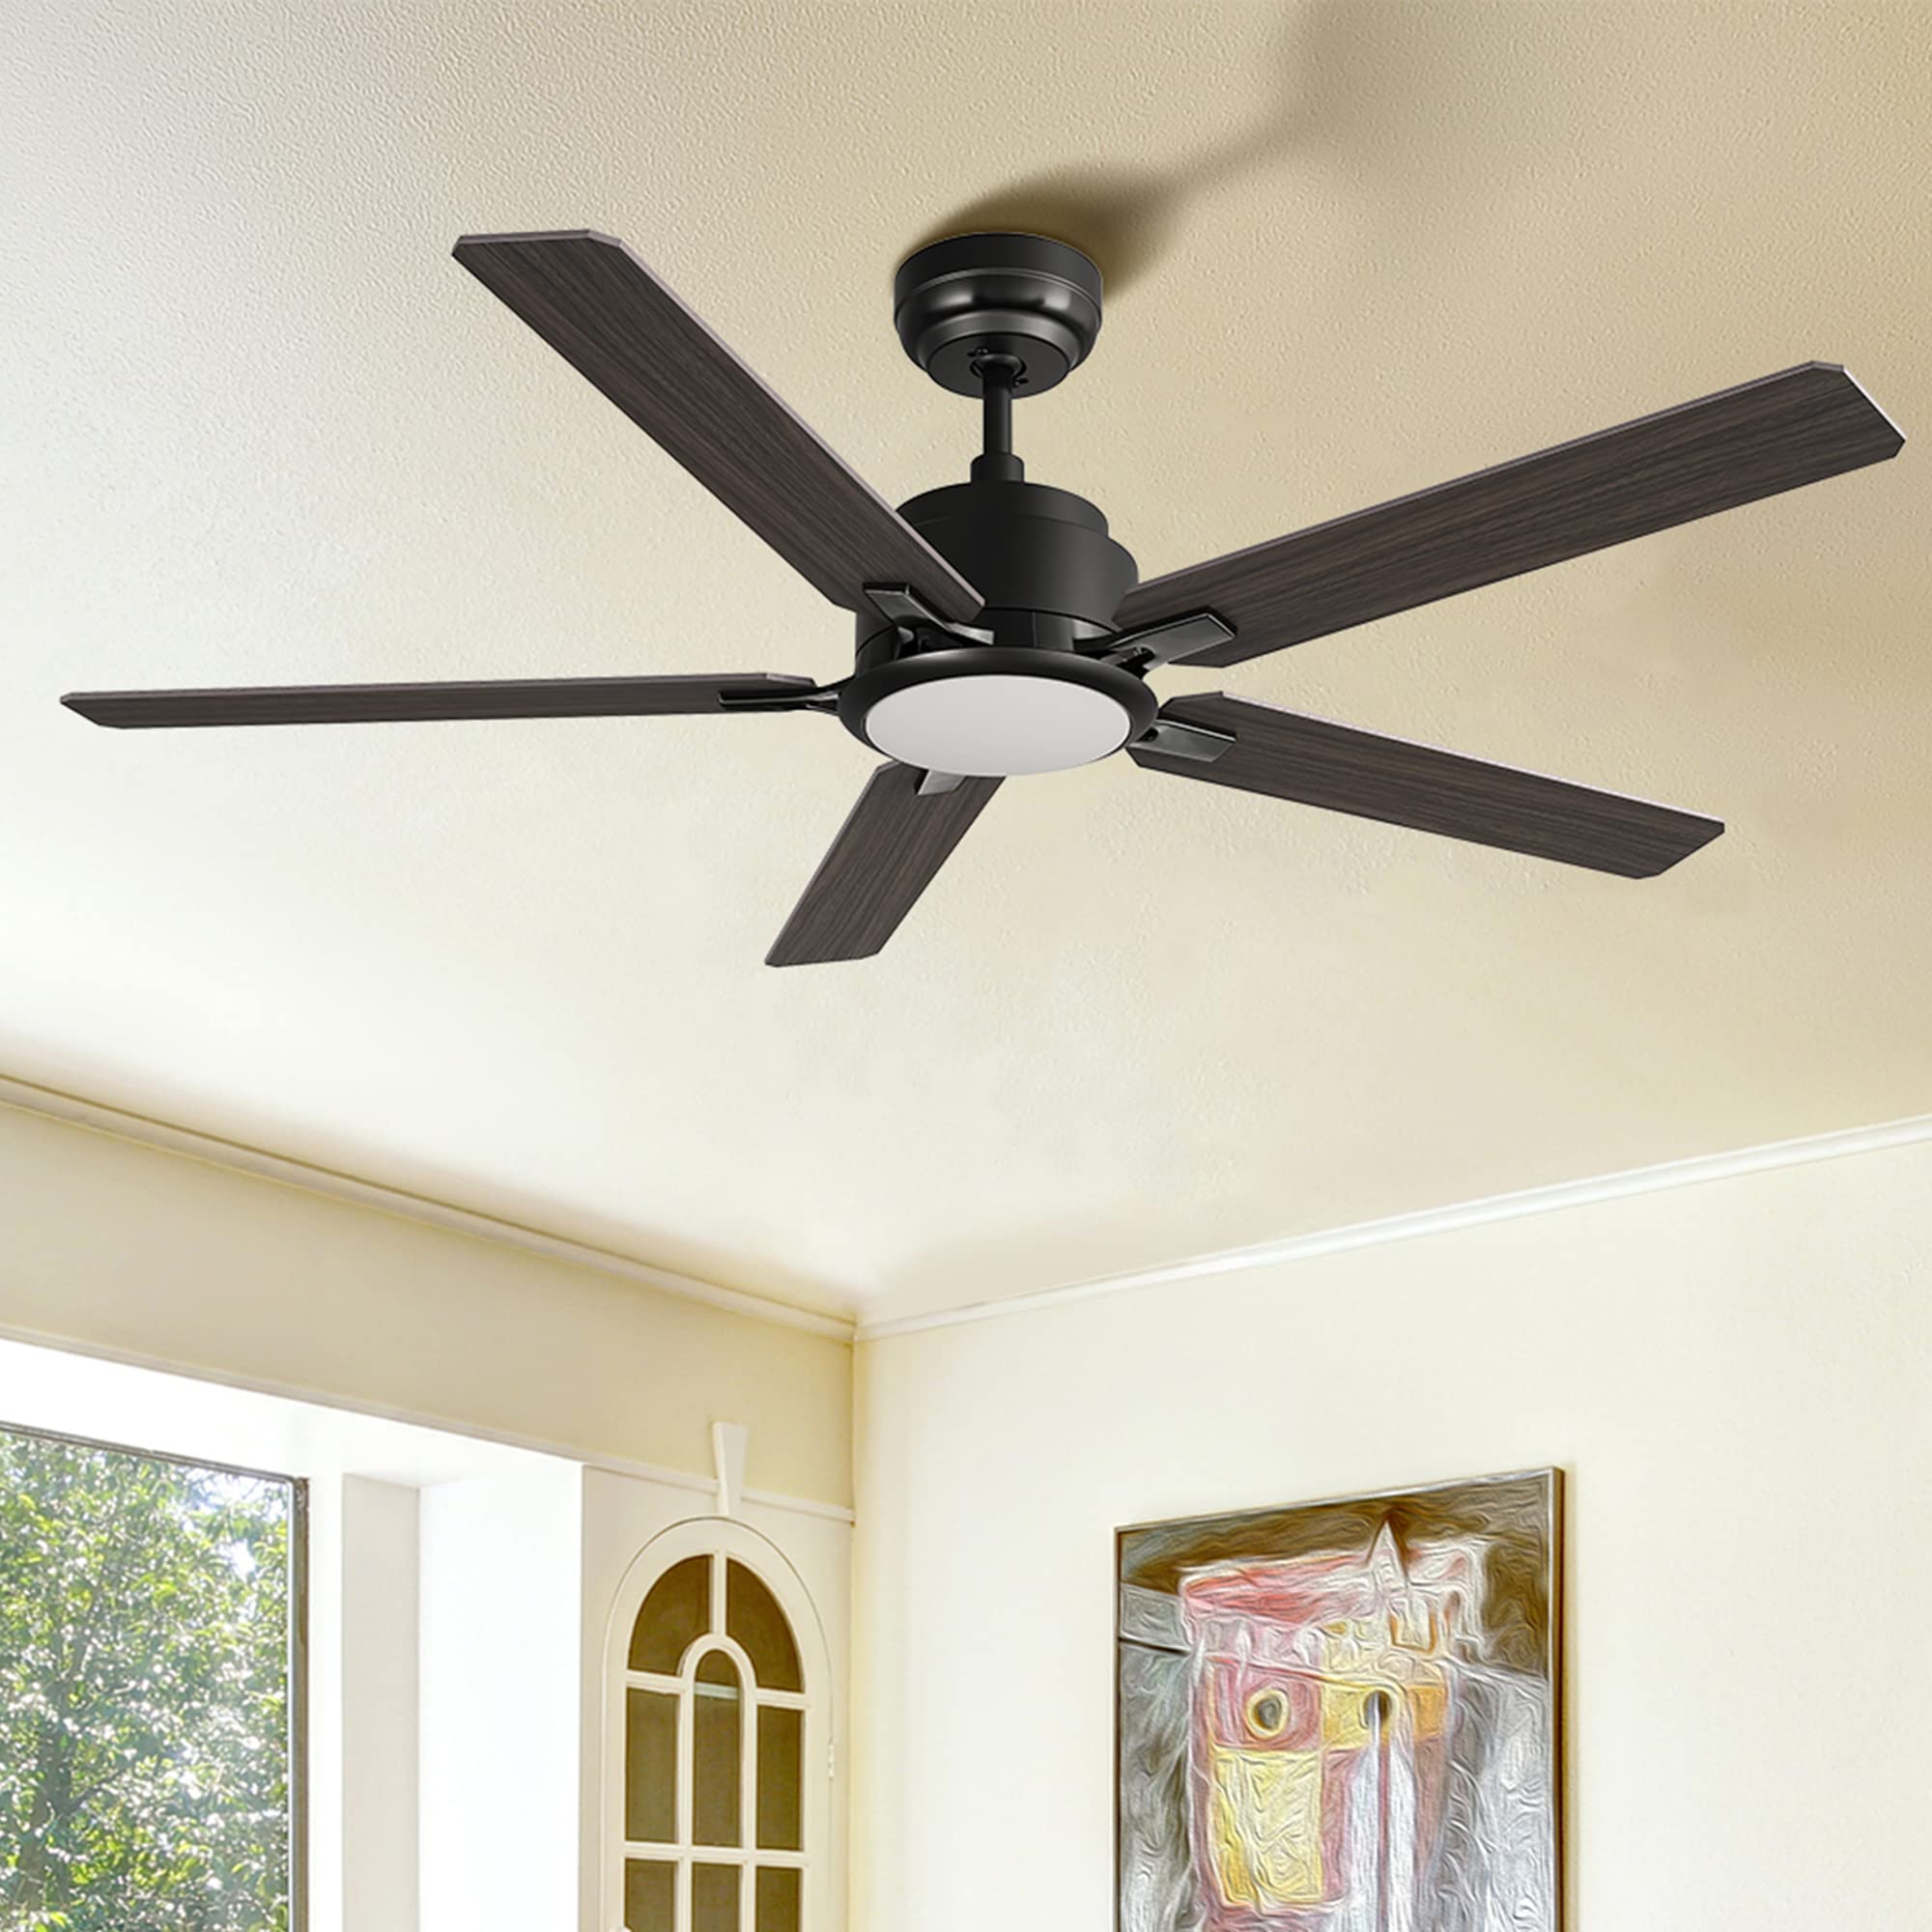 CEME Smart Ceiling Fan with Lights, Indoor & Outdoor Ceiling Fan with Remote, 10 Speeds Smart Ceiling Fan Works with Alexa, Siri & Google, 52 Inch Modern Ceiling Fan with DC Motor, Black Ceiling Fan